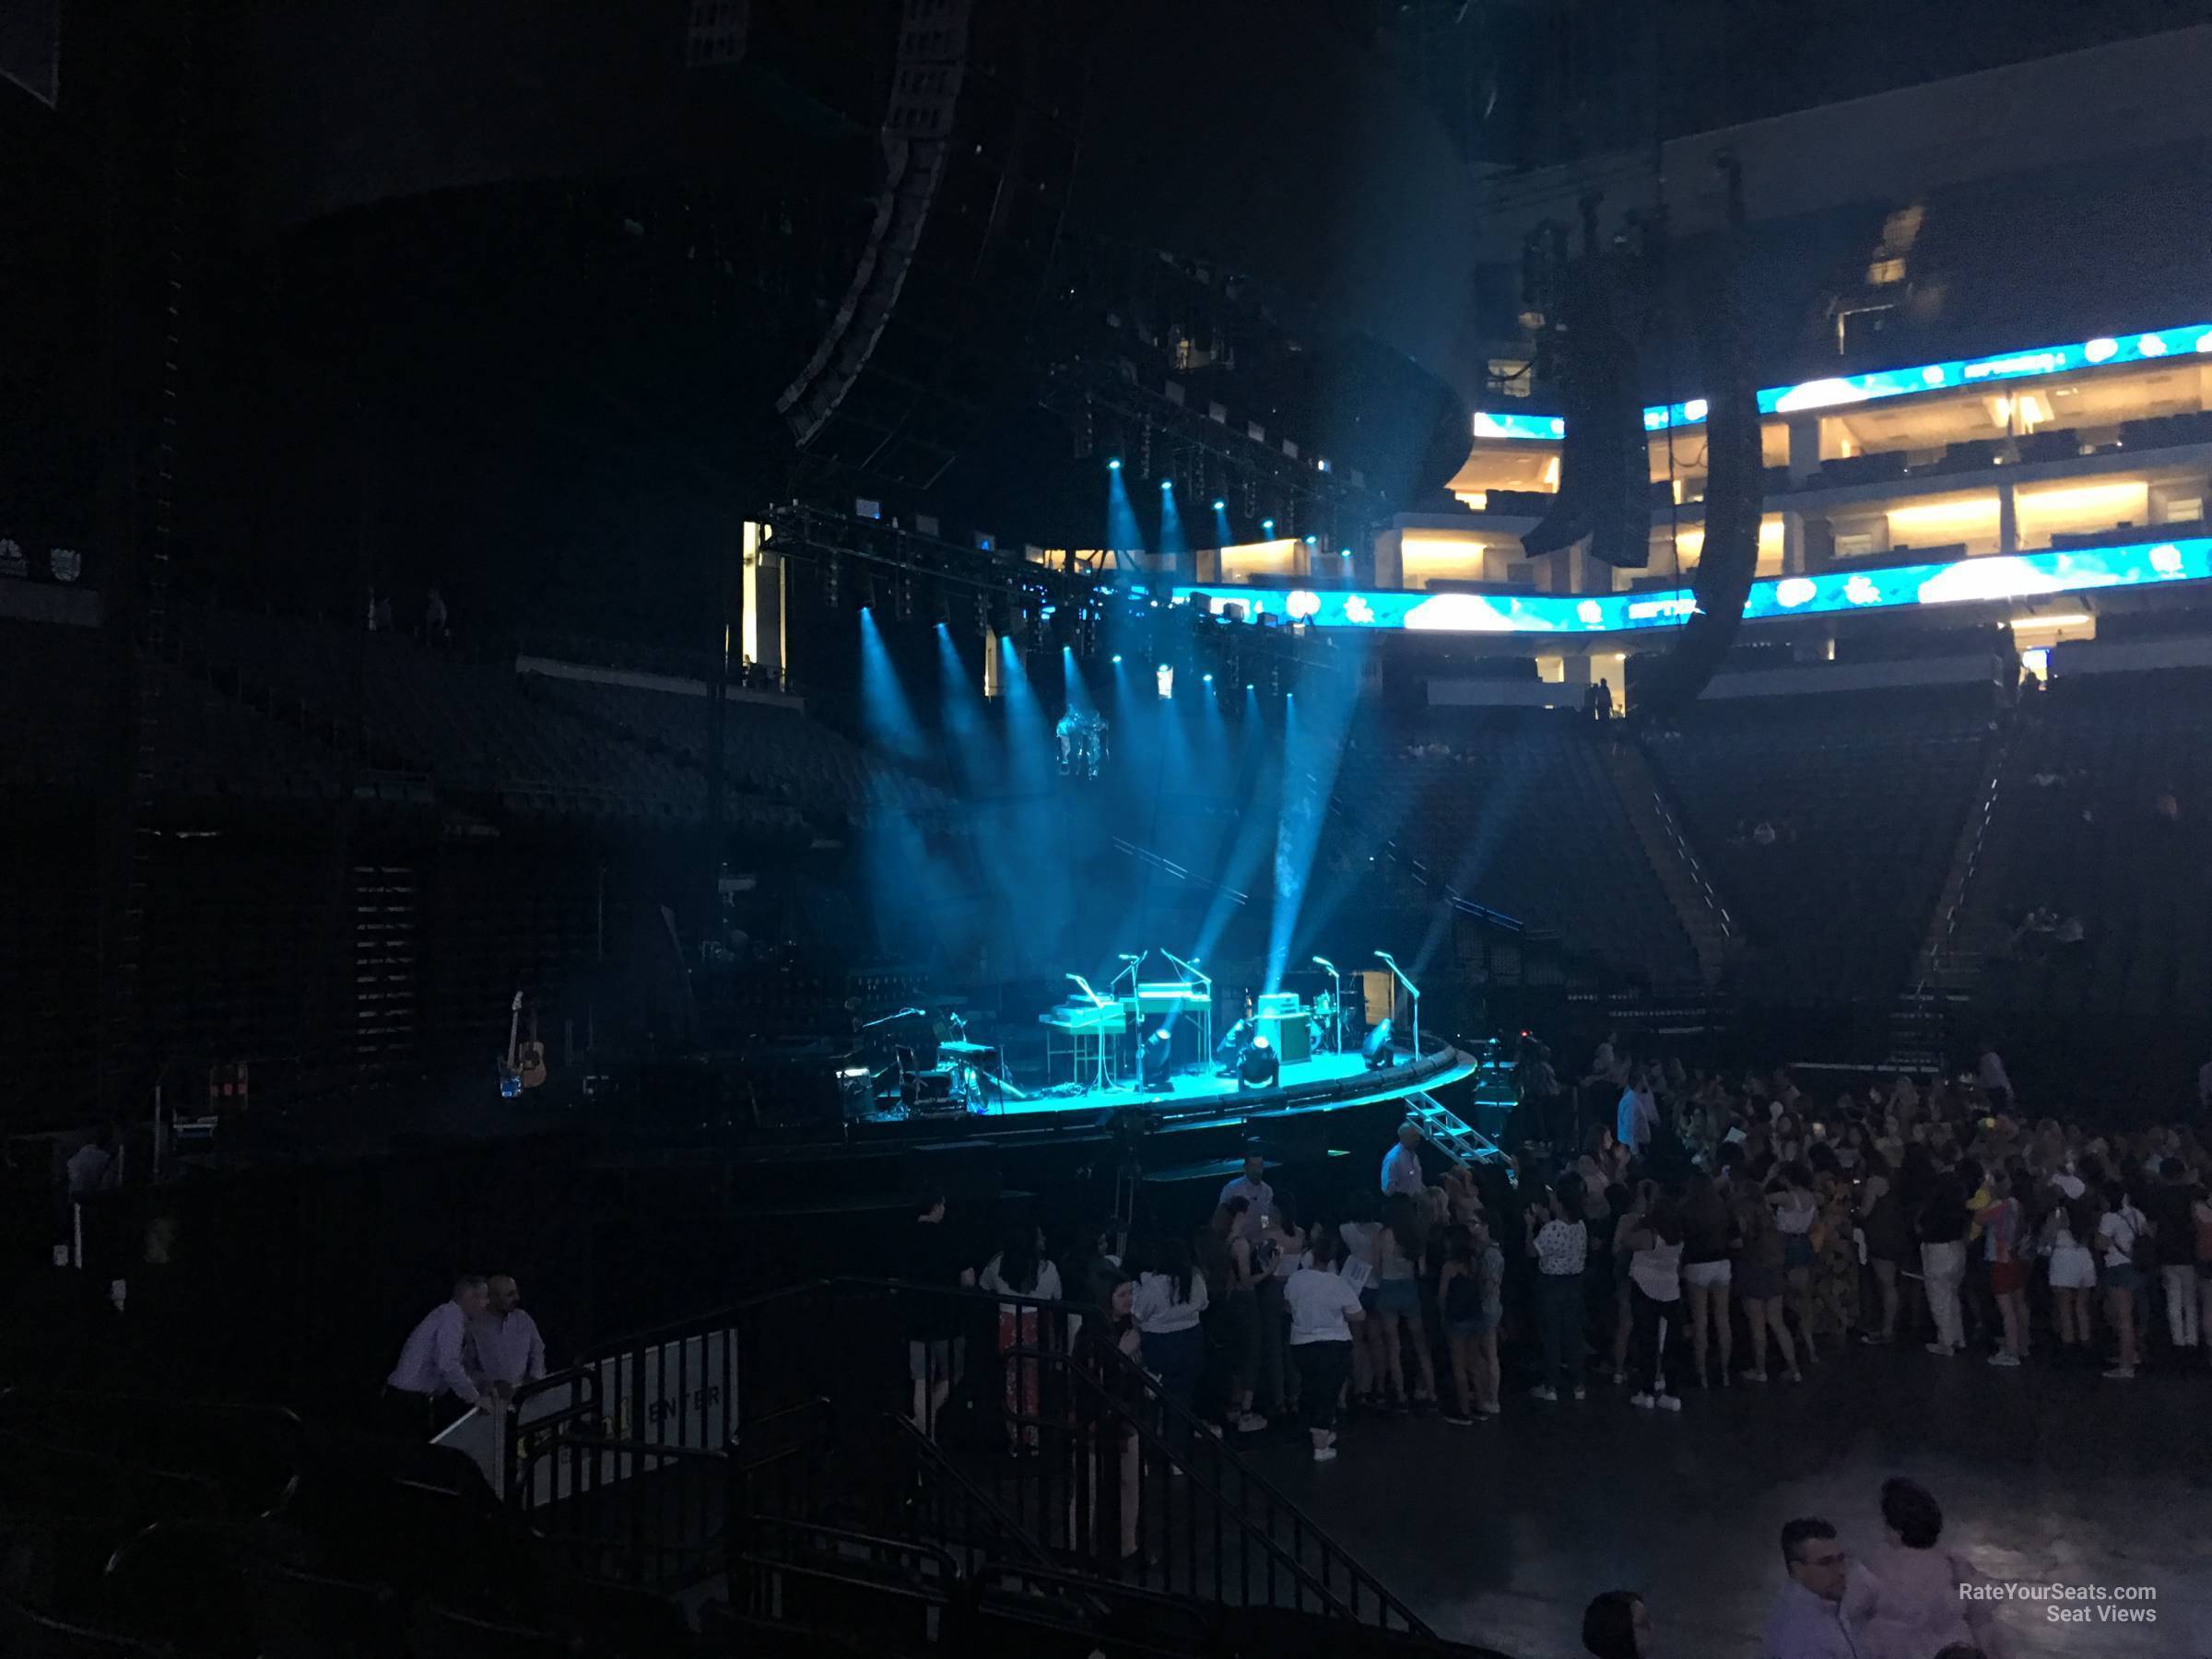 section 121, row a seat view  for concert - golden 1 center